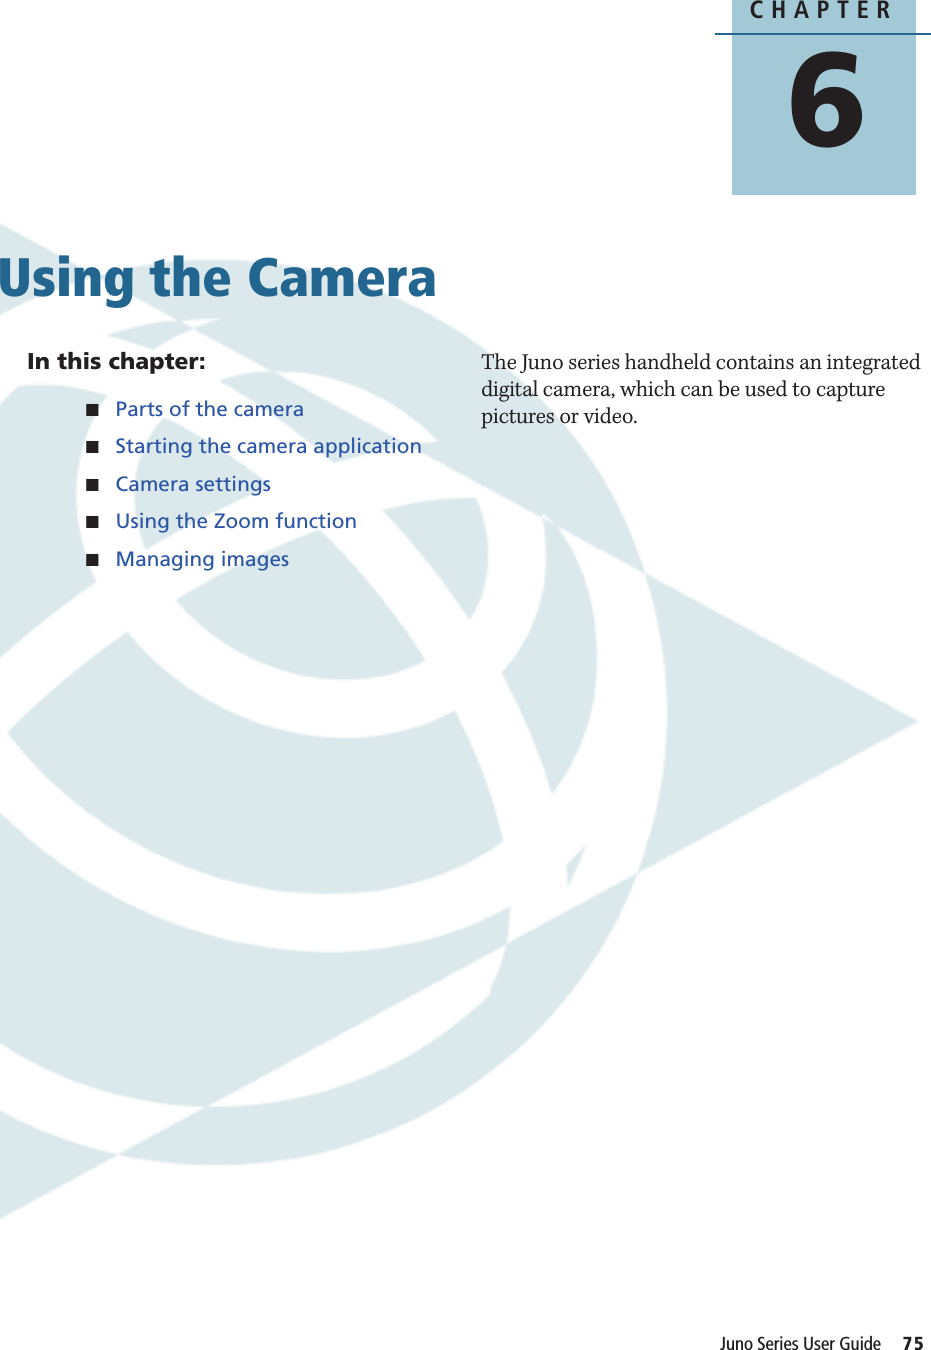 CHAPTER6Juno Series User Guide     75Using the Camera 6In this chapter:QParts of the cameraQStarting the camera applicationQCamera settingsQUsing the Zoom functionQManaging imagesThe Juno series handheld contains an integrated digital camera, which can be used to capture pictures or video.